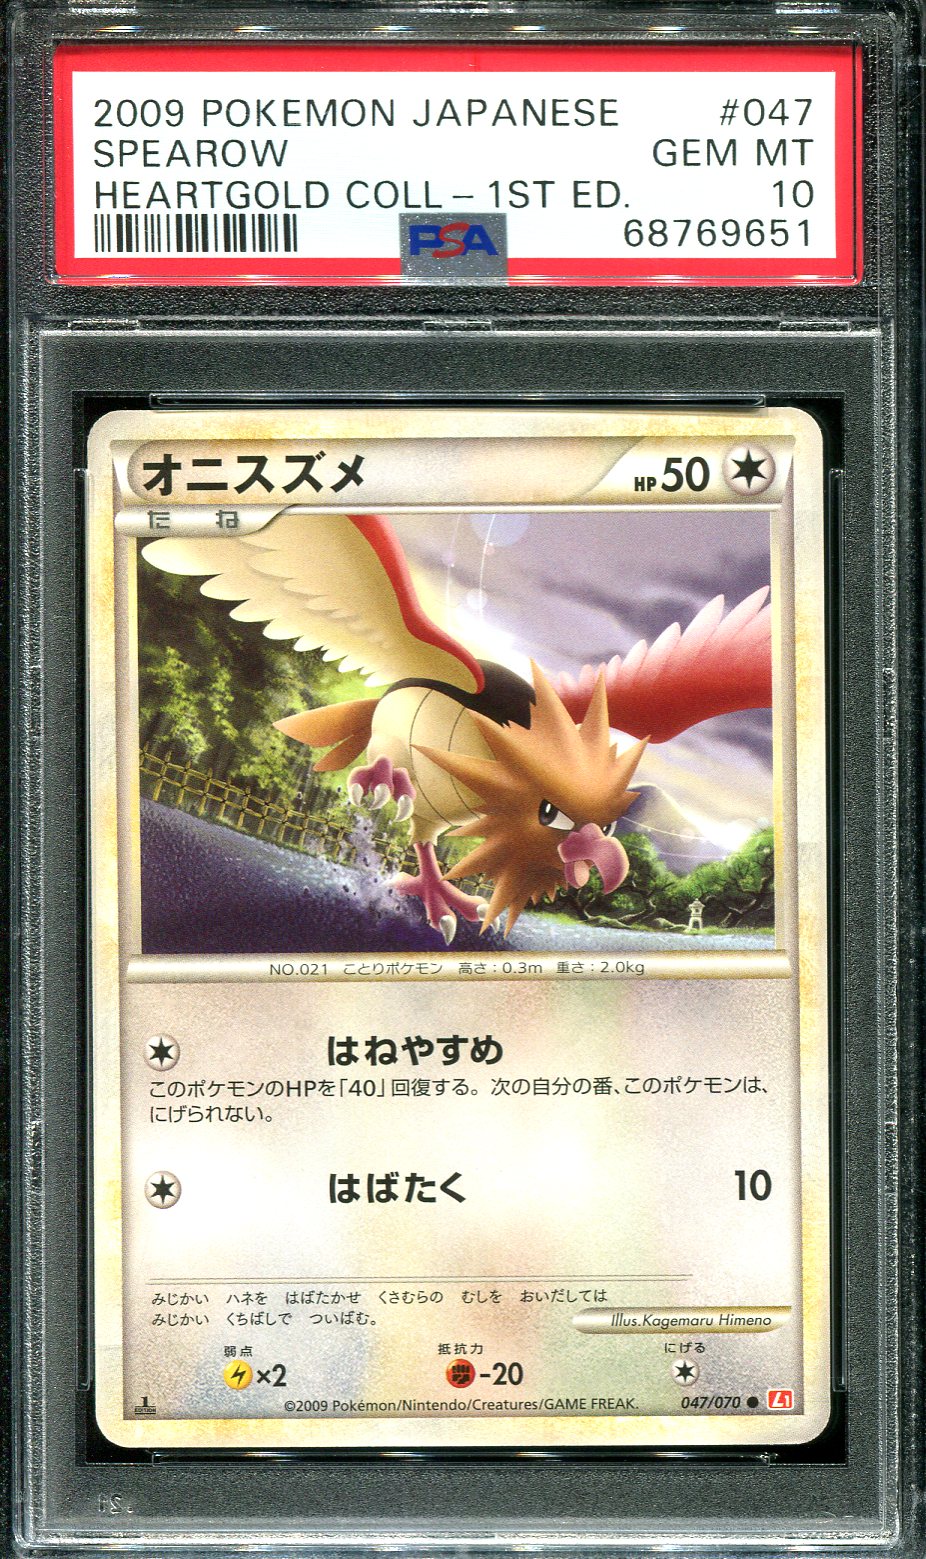 SPEAROW 047/070 PSA 10 POKEMON HEARTGOLD COLLECTION L1 JAPANESE 1ST EDITION